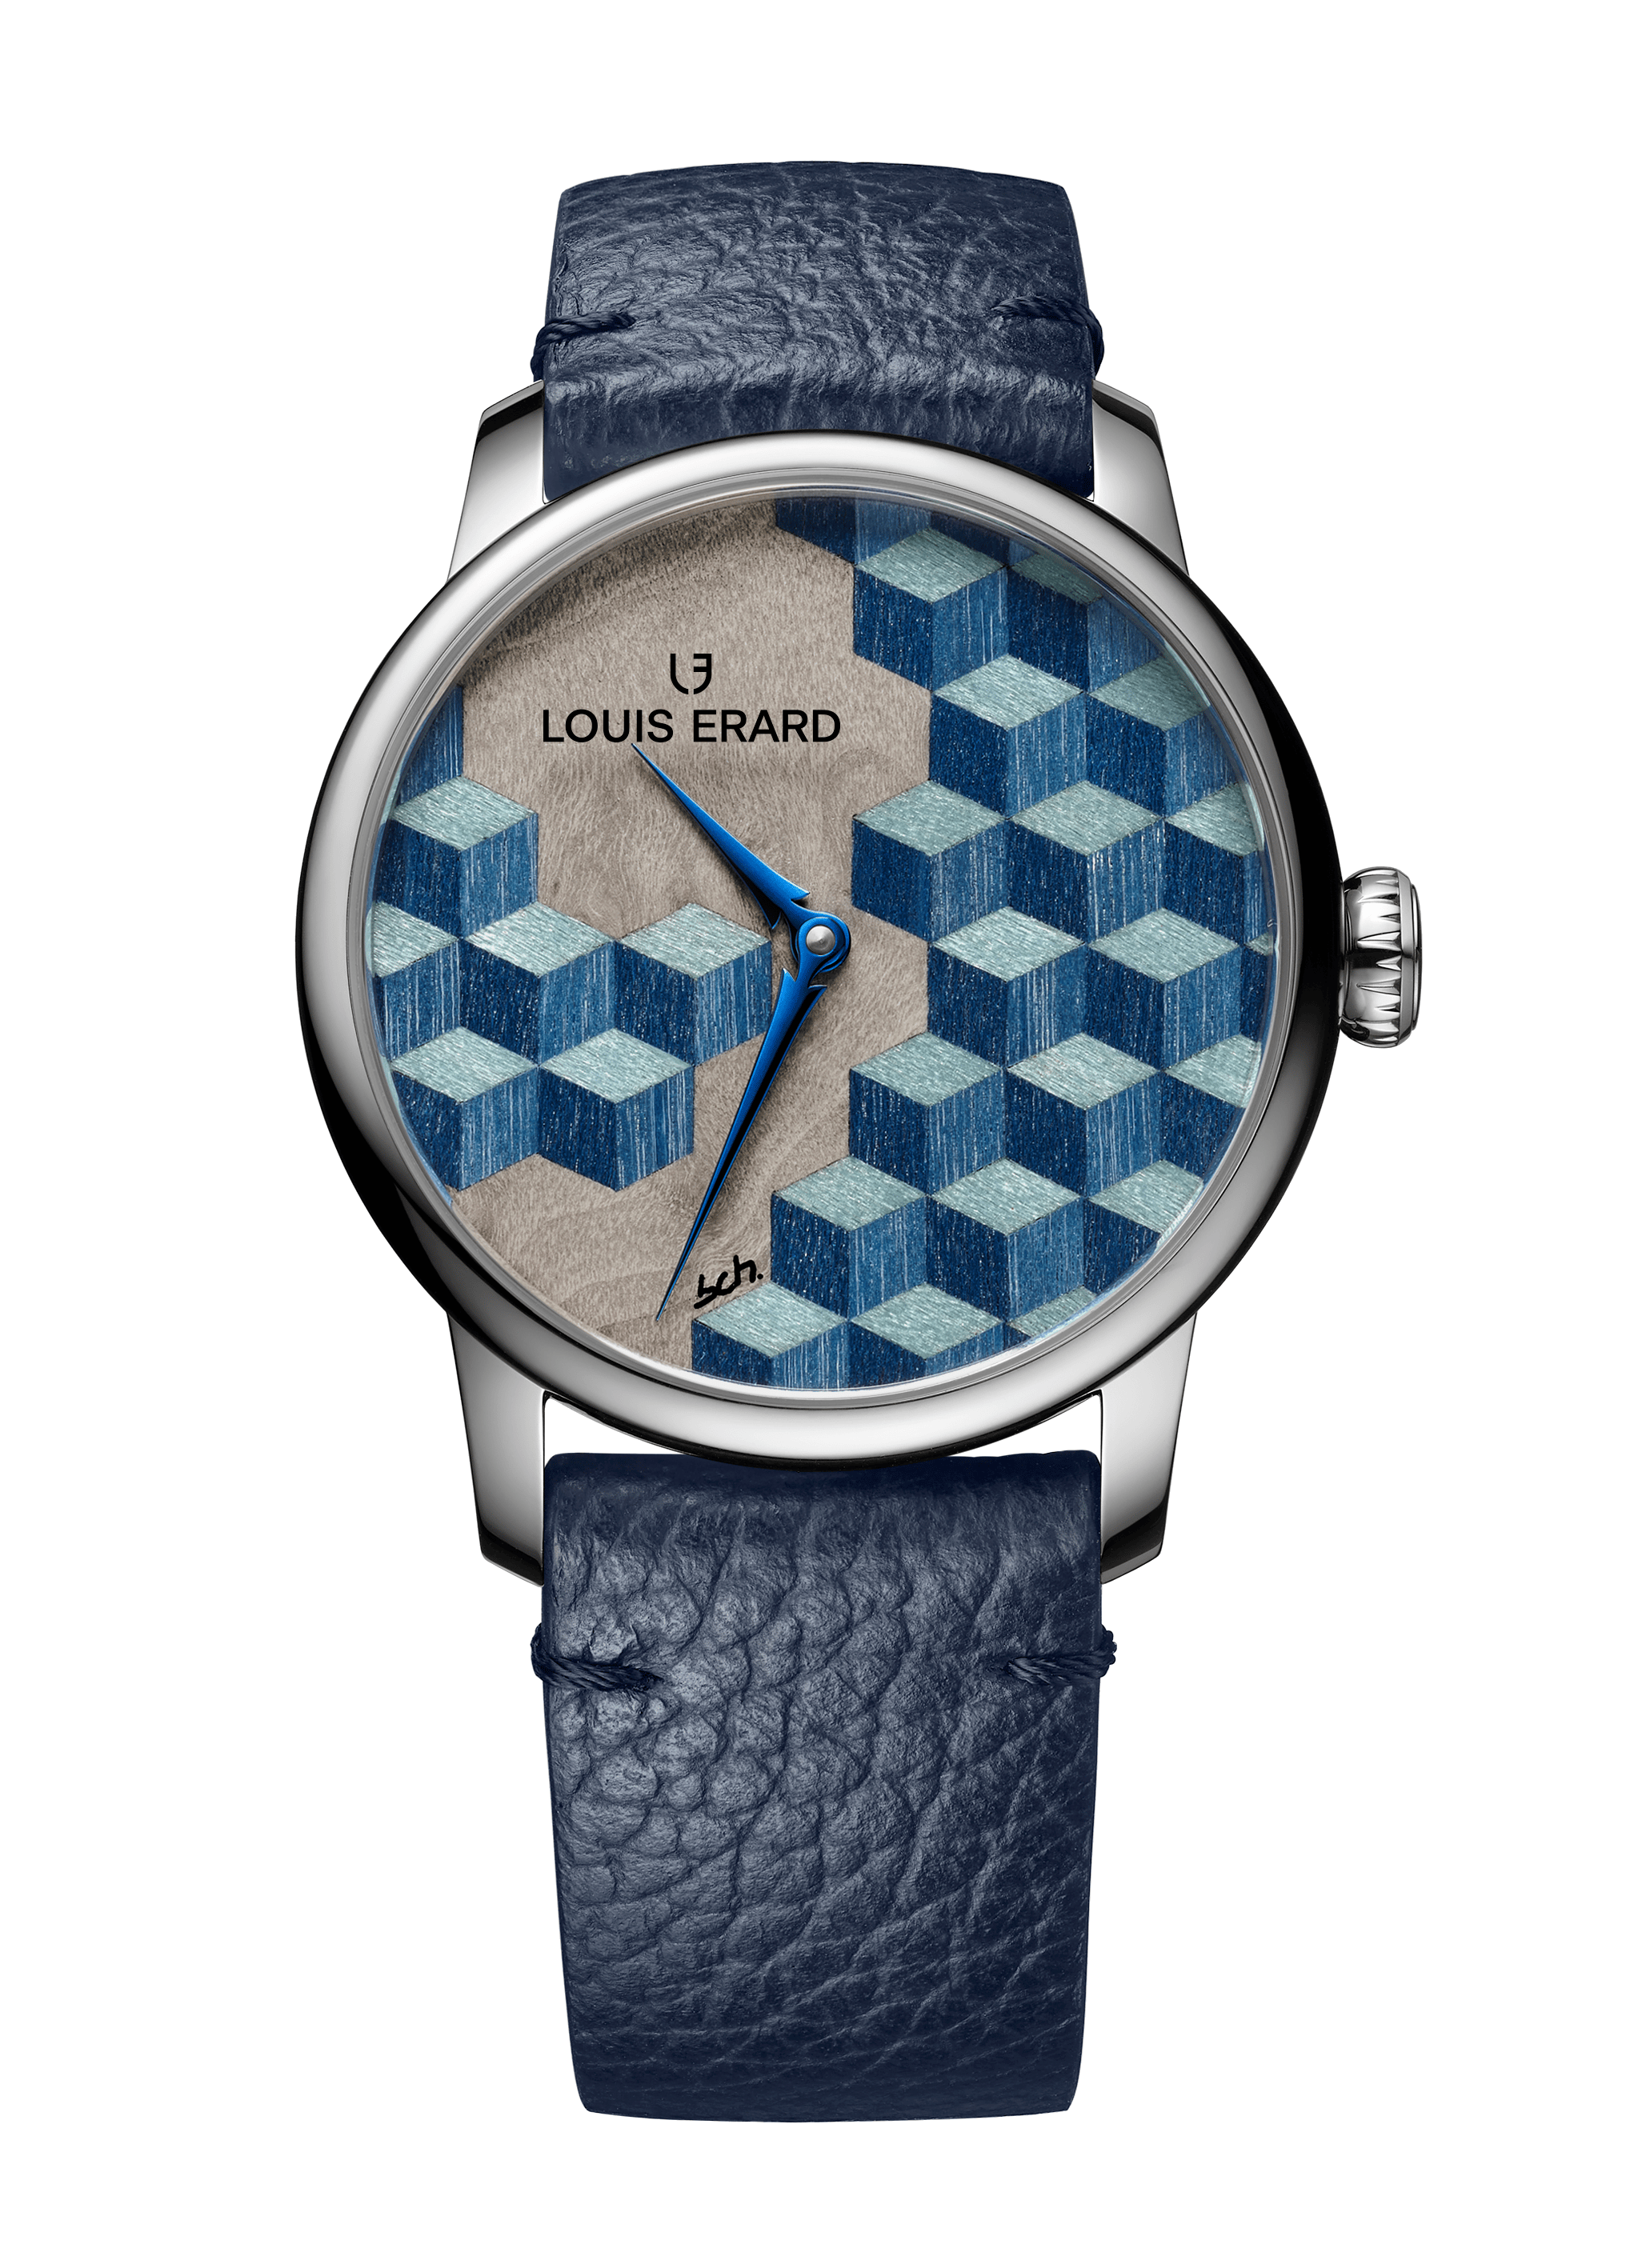 Introducing The New Louis Erard Excellence Marqueterie (Live Pics & Price)